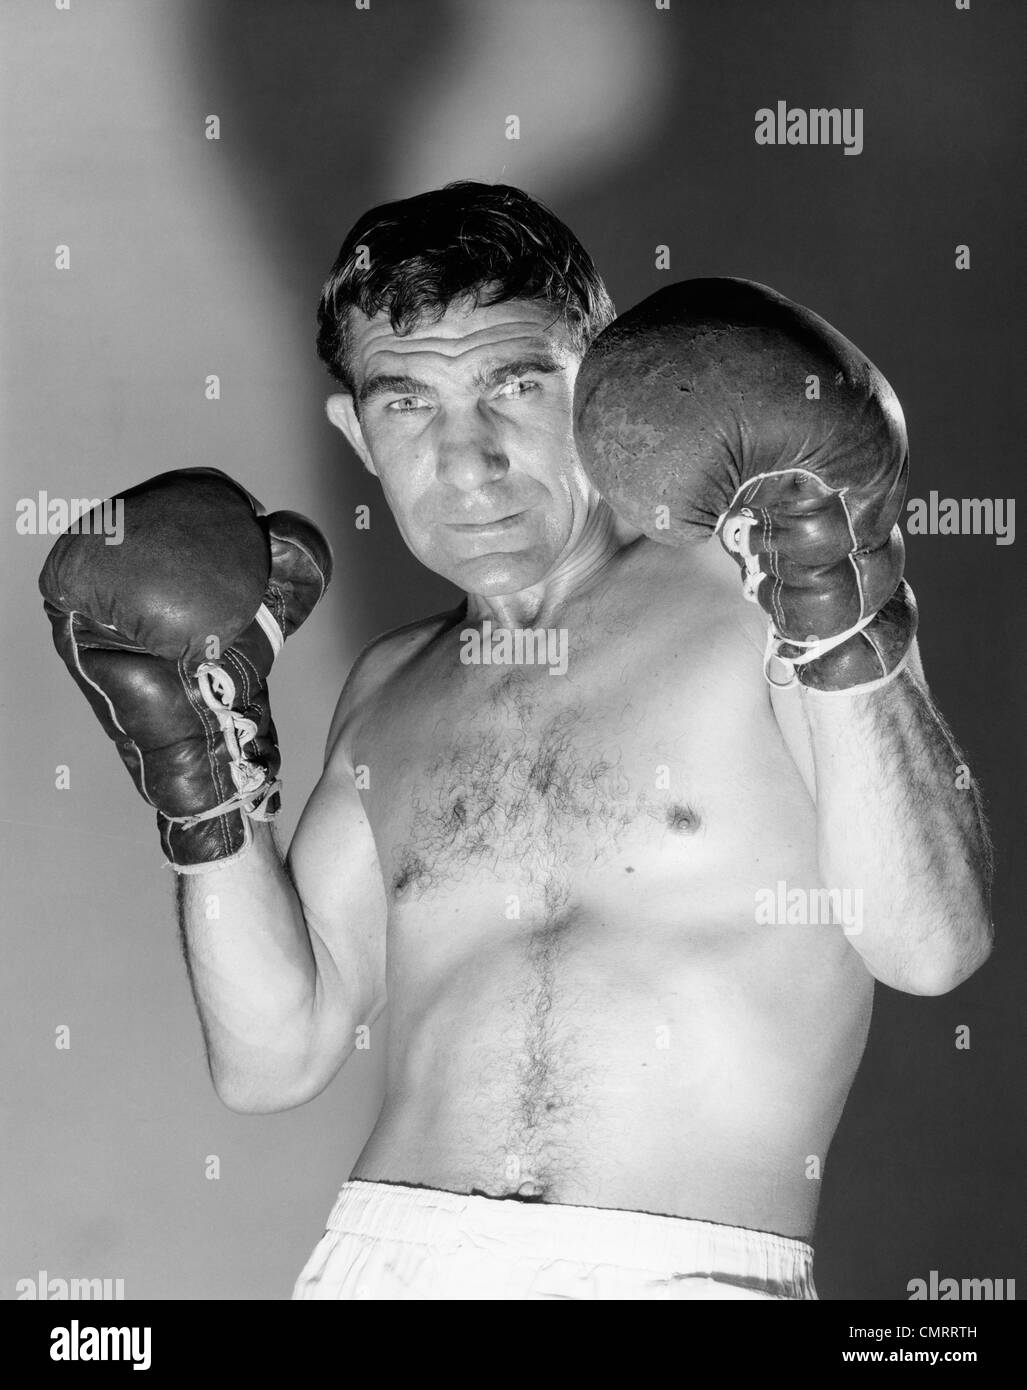 1960s PORTRAIT OF BOXER HOLDING GLOVED HANDS UP TO PROTECT FACE LOOKING AT  CAMERA Stock Photo - Alamy